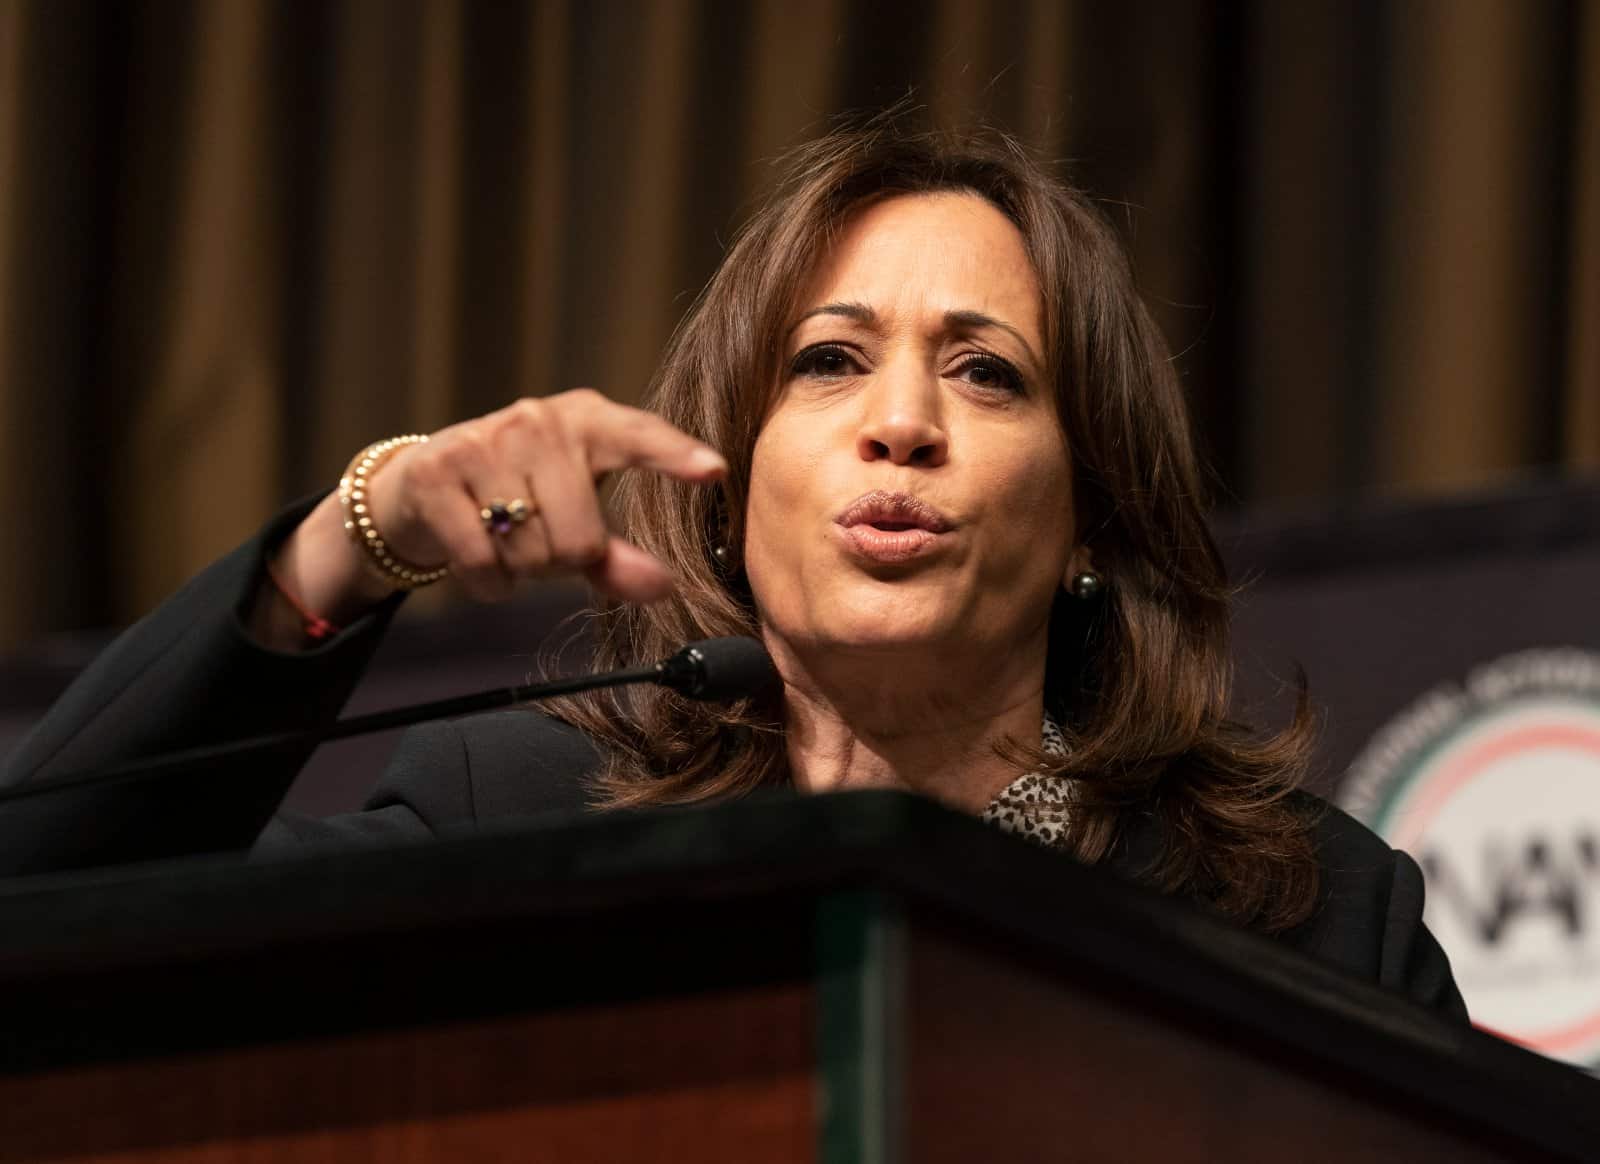 Image Credit: Shutterstock / lev radin <p><span>Vice President Kamala Harris faced criticism for telling potential migrants “Do not come” during a visit to Guatemala, reflecting the administration’s struggle to balance humanitarian rhetoric with deterrence.</span></p>